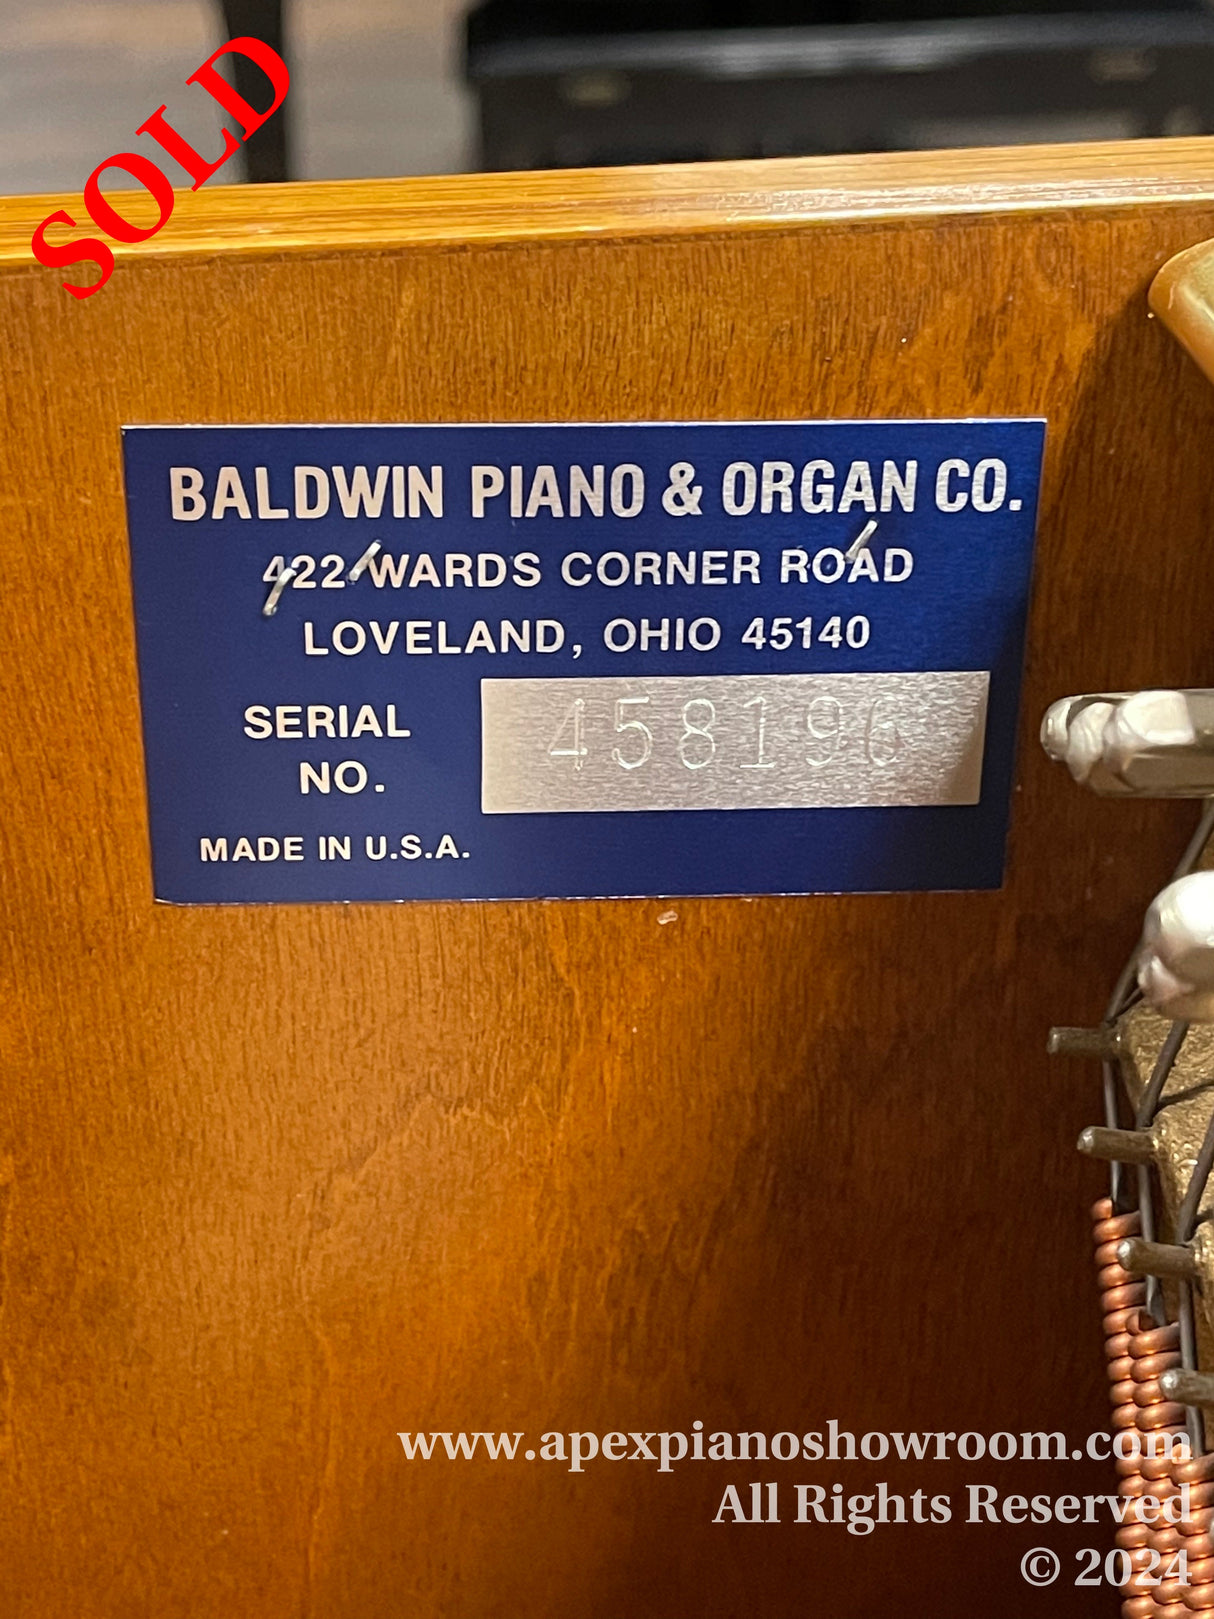 Manufacturers label on a Baldwin piano showing the company name, address in Loveland, Ohio, and serial number 458196, indicating the pianos identification details.